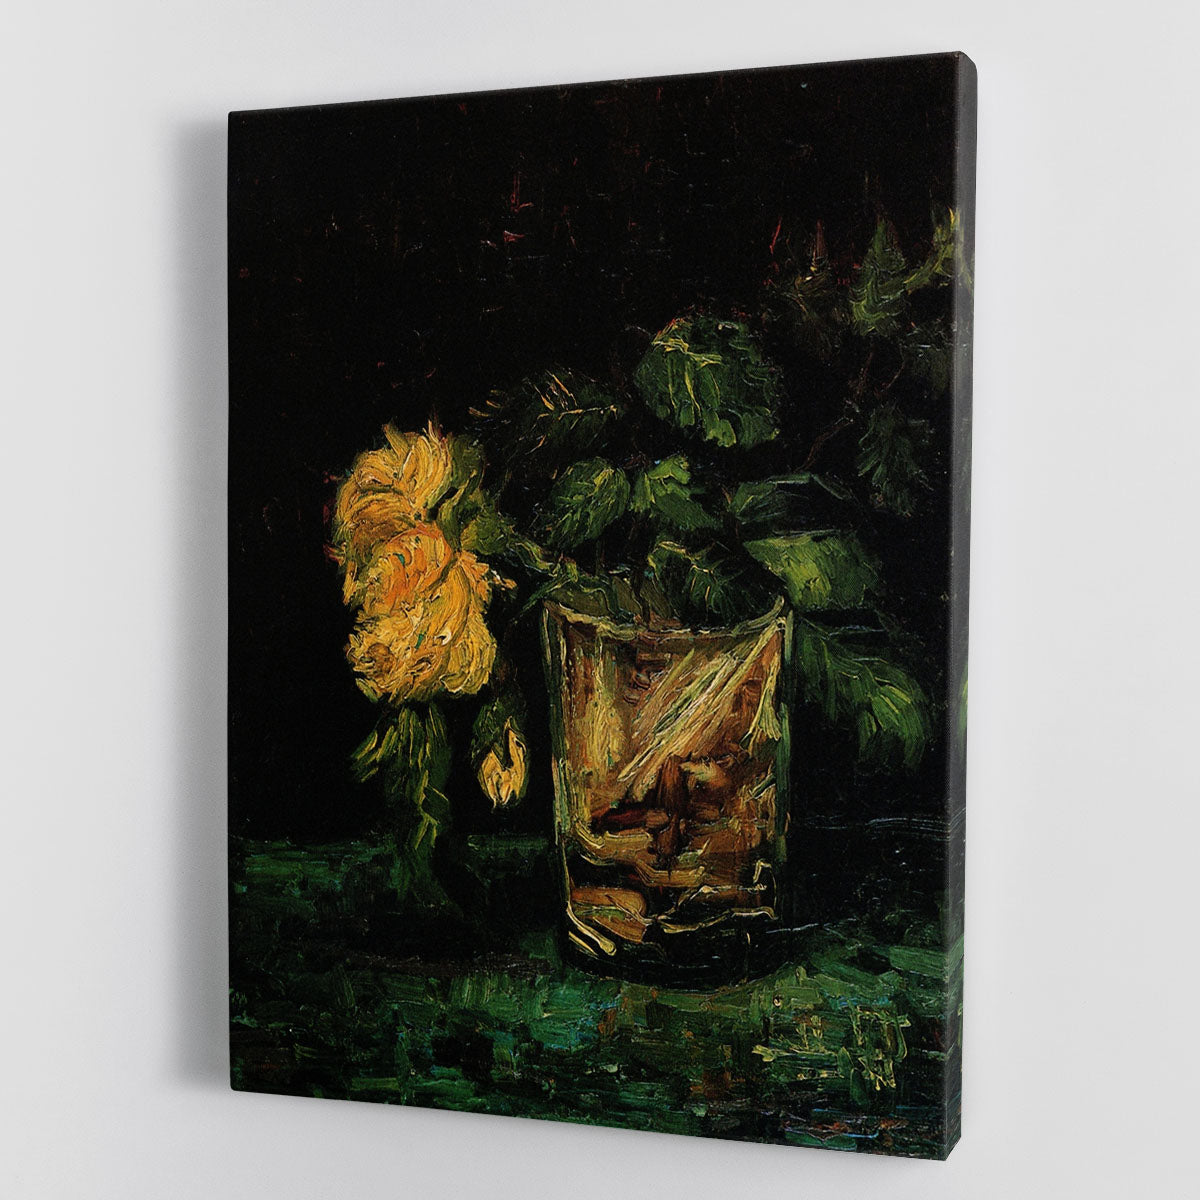 Glass with Roses by Van Gogh Canvas Print or Poster - Canvas Art Rocks - 1